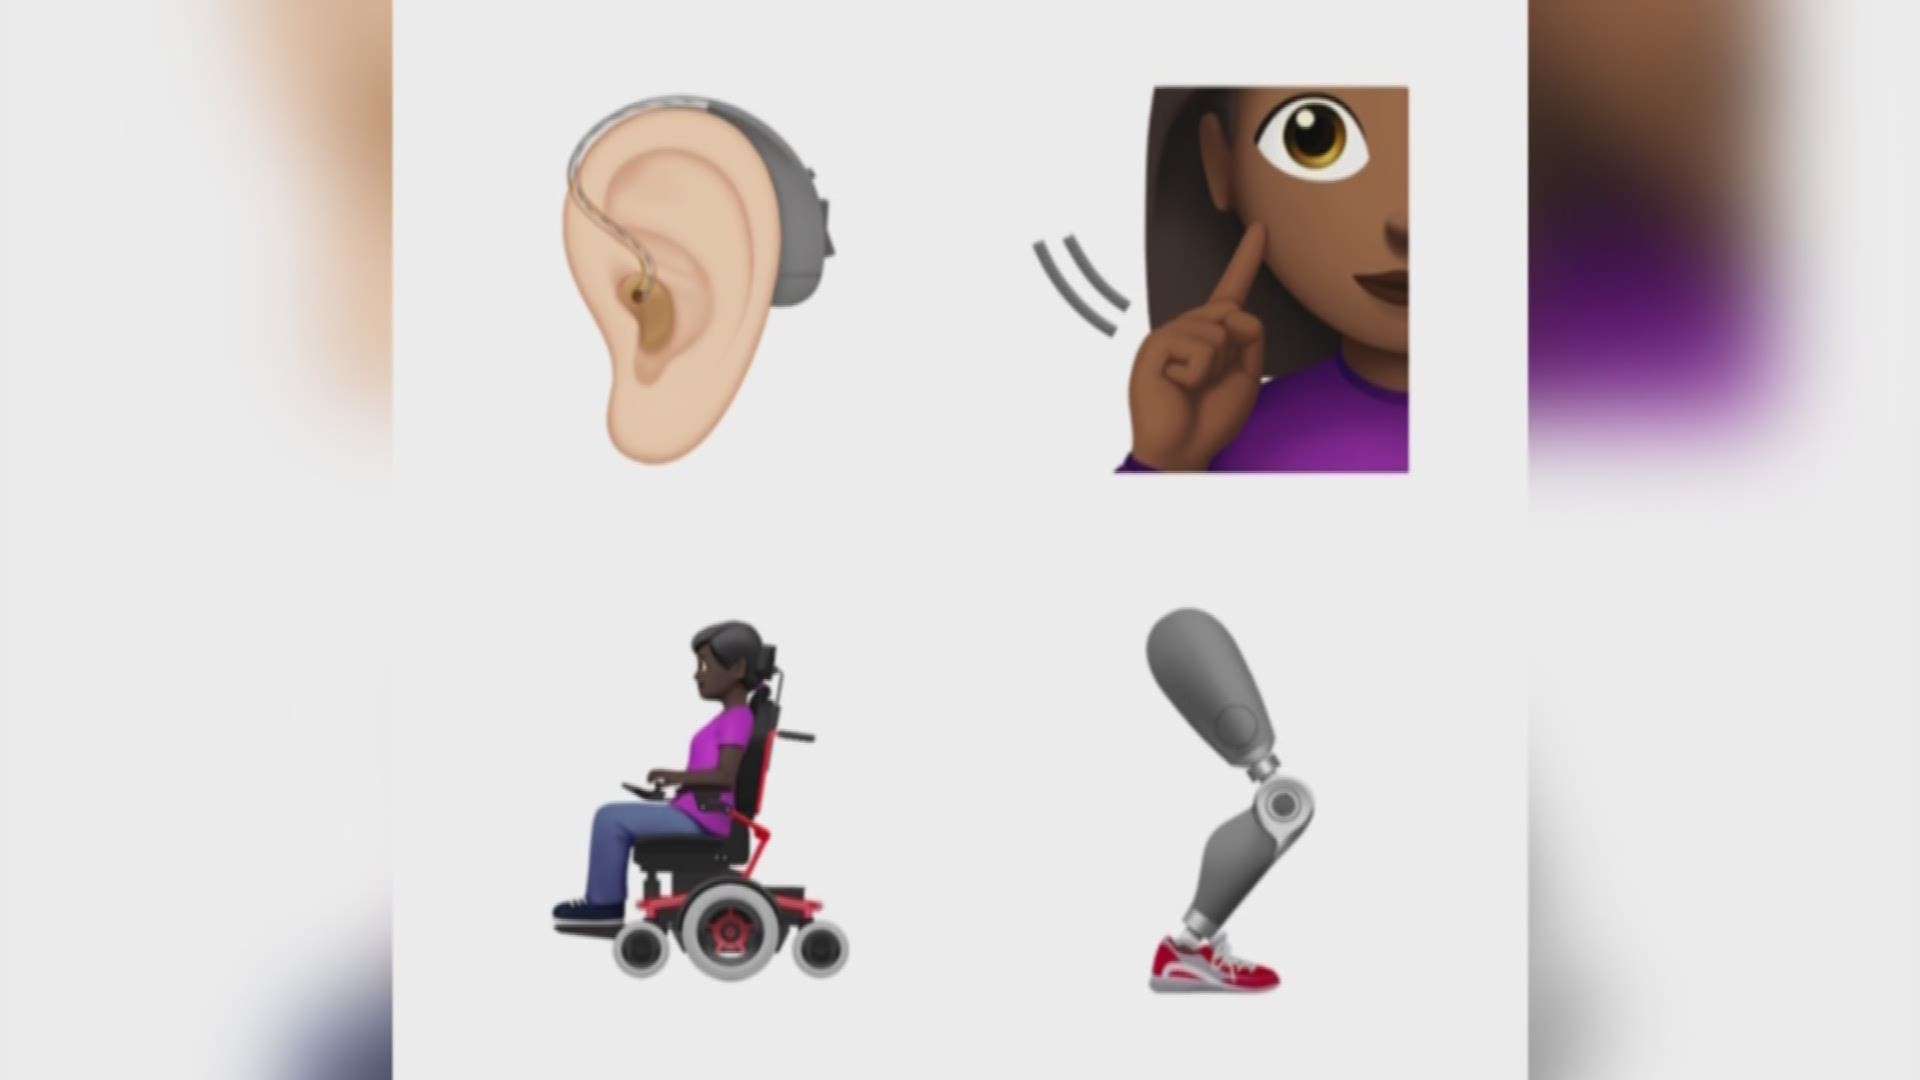 Apple and Google are rolling out dozens of new emojis that of course include cute critters, but also expand the number of images of human diversity.